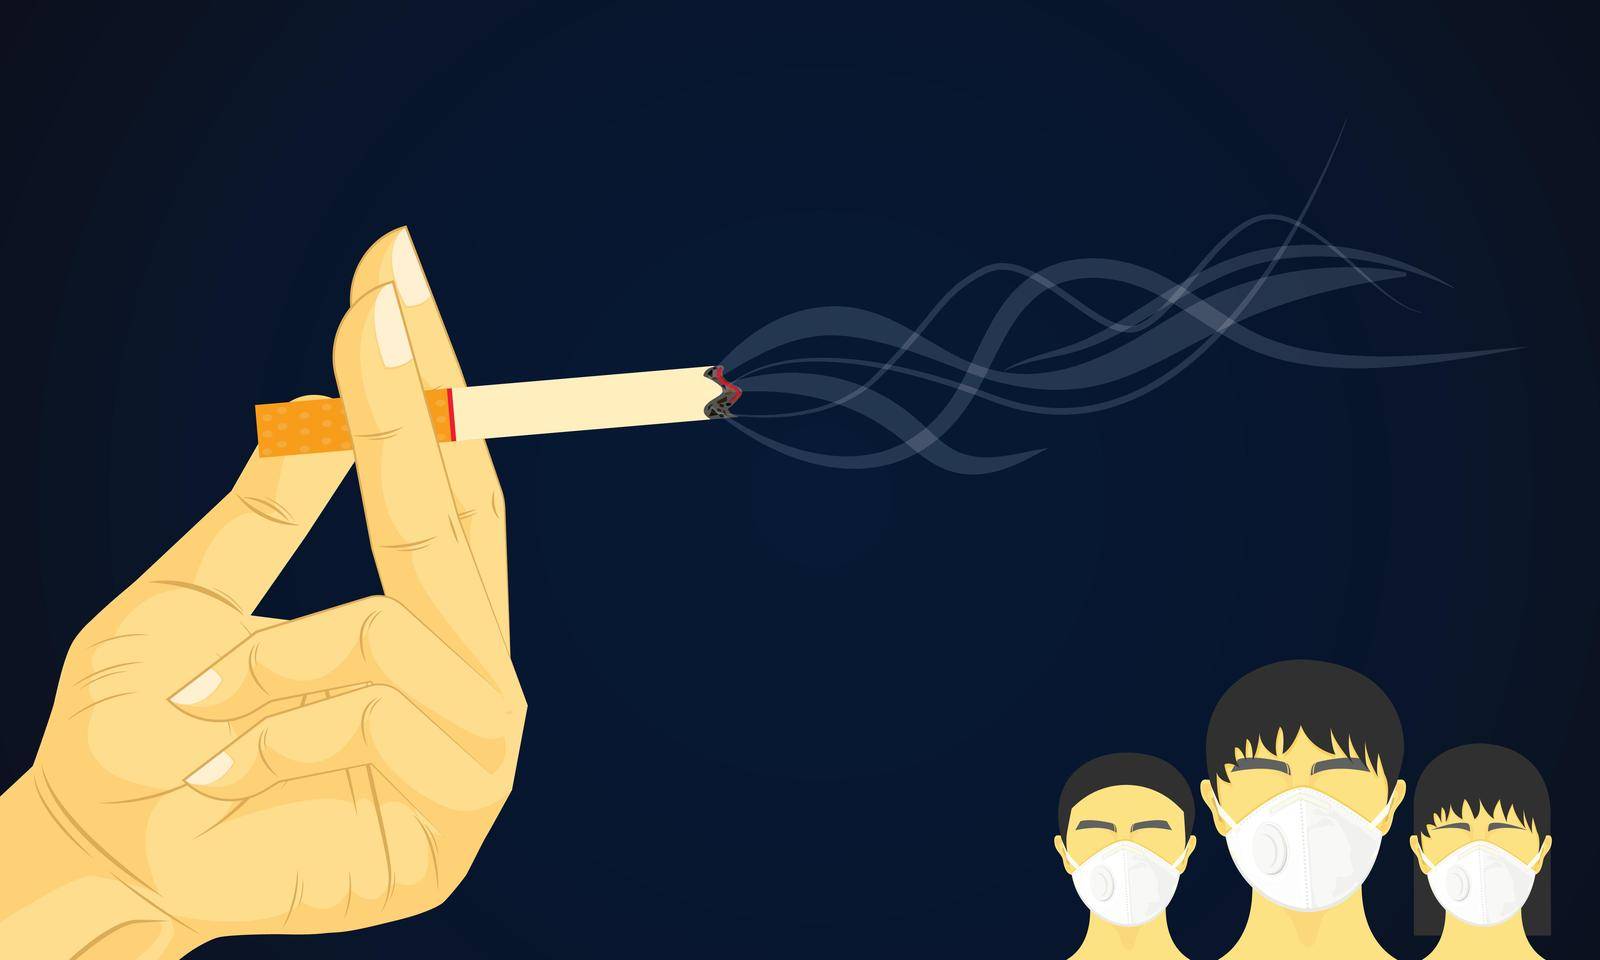 hand holding cigarette smoke floating in the air. dangerous to health kid other people. vector illustration eps10 by Kmaunta